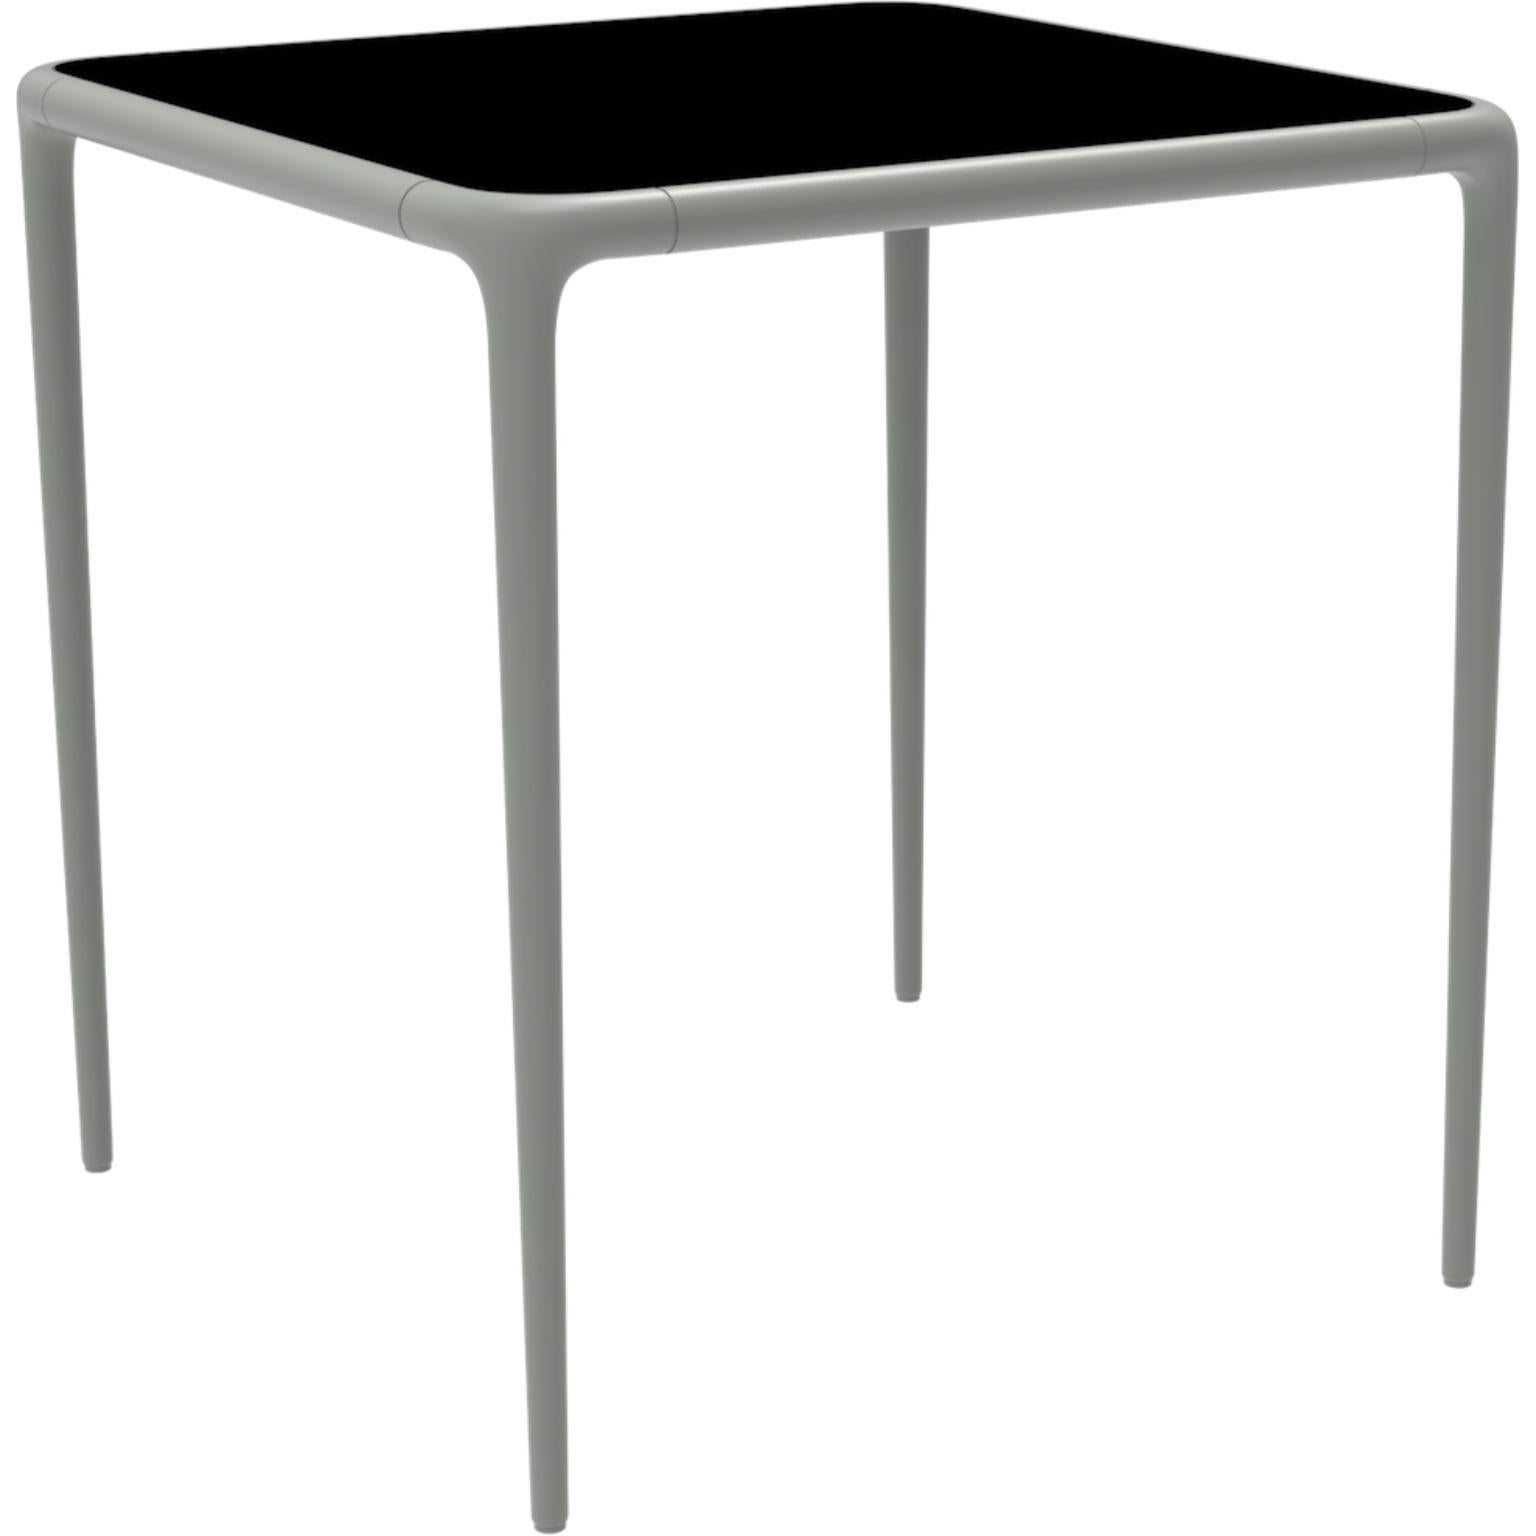 Xaloc silver glass top table 70 by Mowee.
Dimensions: D70 x W70 x H74 cm.
Material: Aluminum, tinted tempered glass top.
Also available in different aluminum colors and finishes (HPL Black Edge or Neolith).

Xaloc synthesizes the lines of